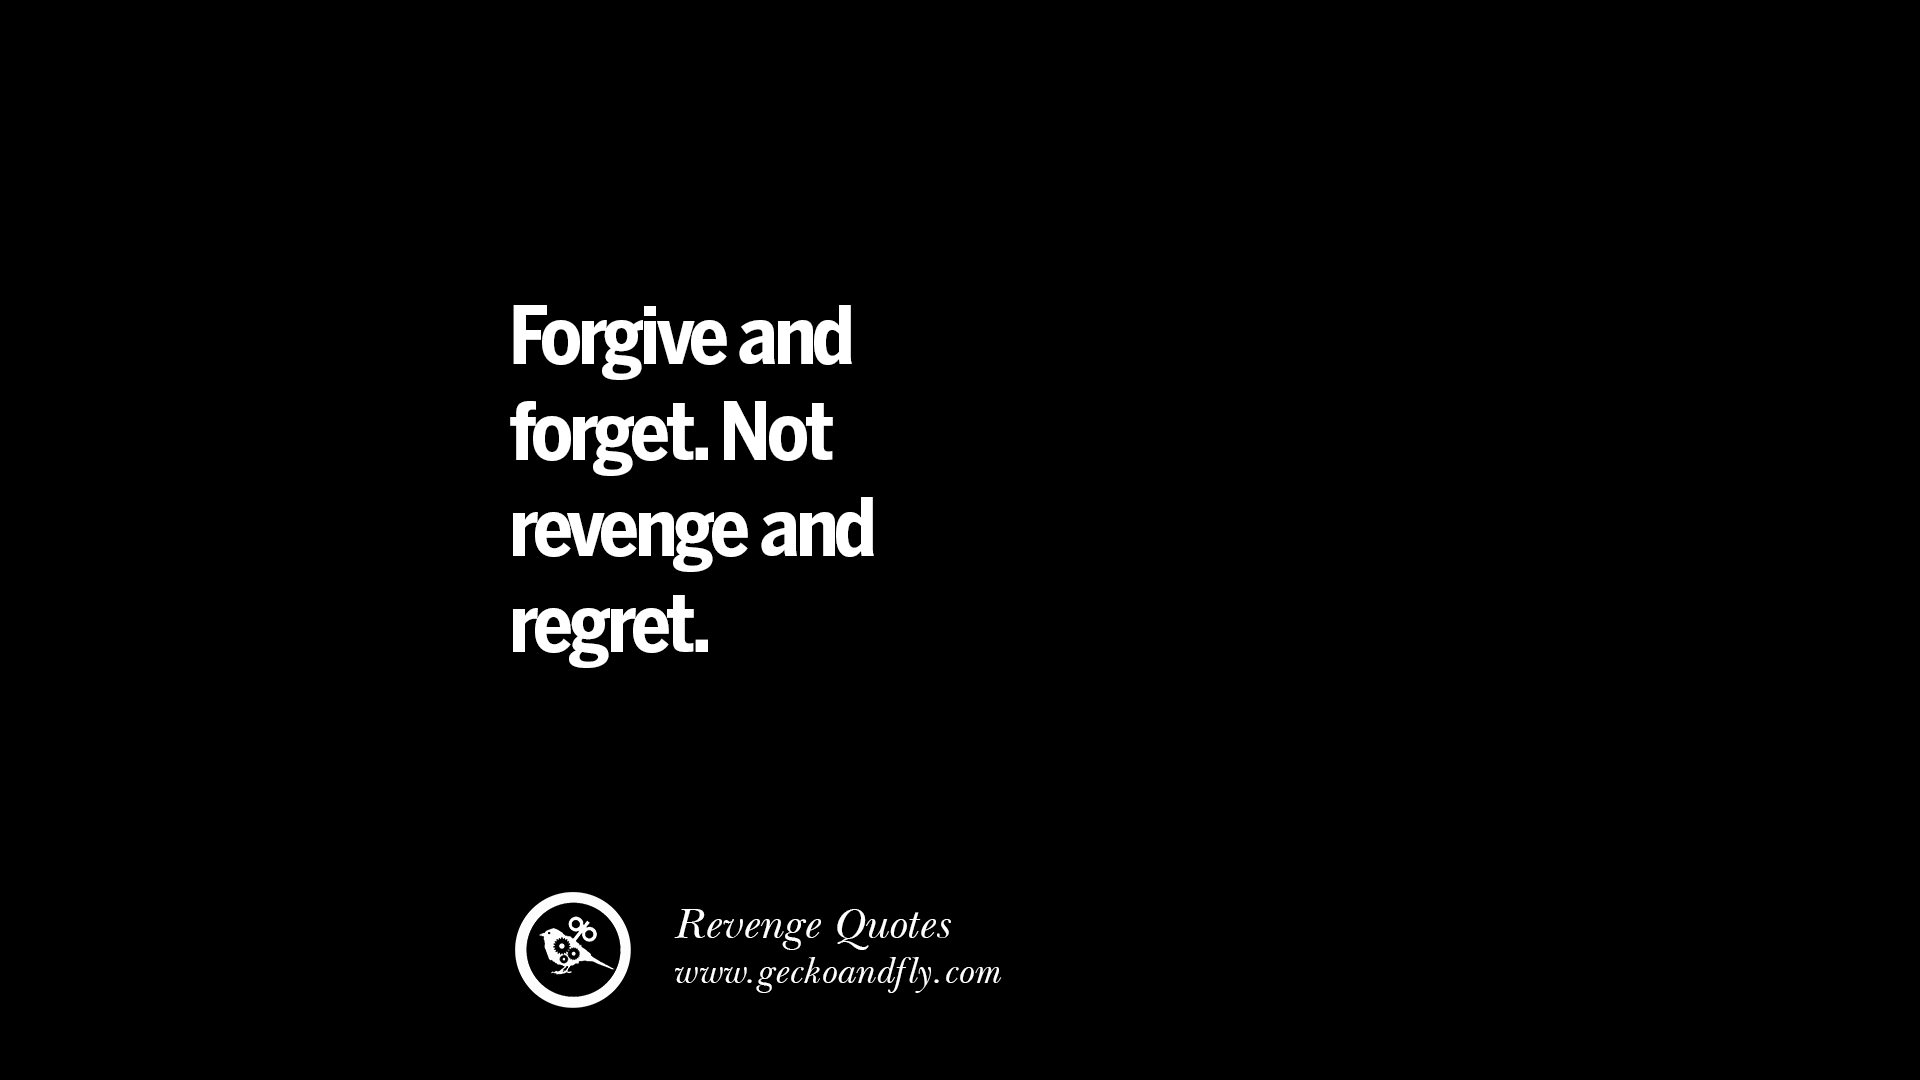 Forgive and for Not revenge and regret Best Quotes about Revenge Relationship breakup karma